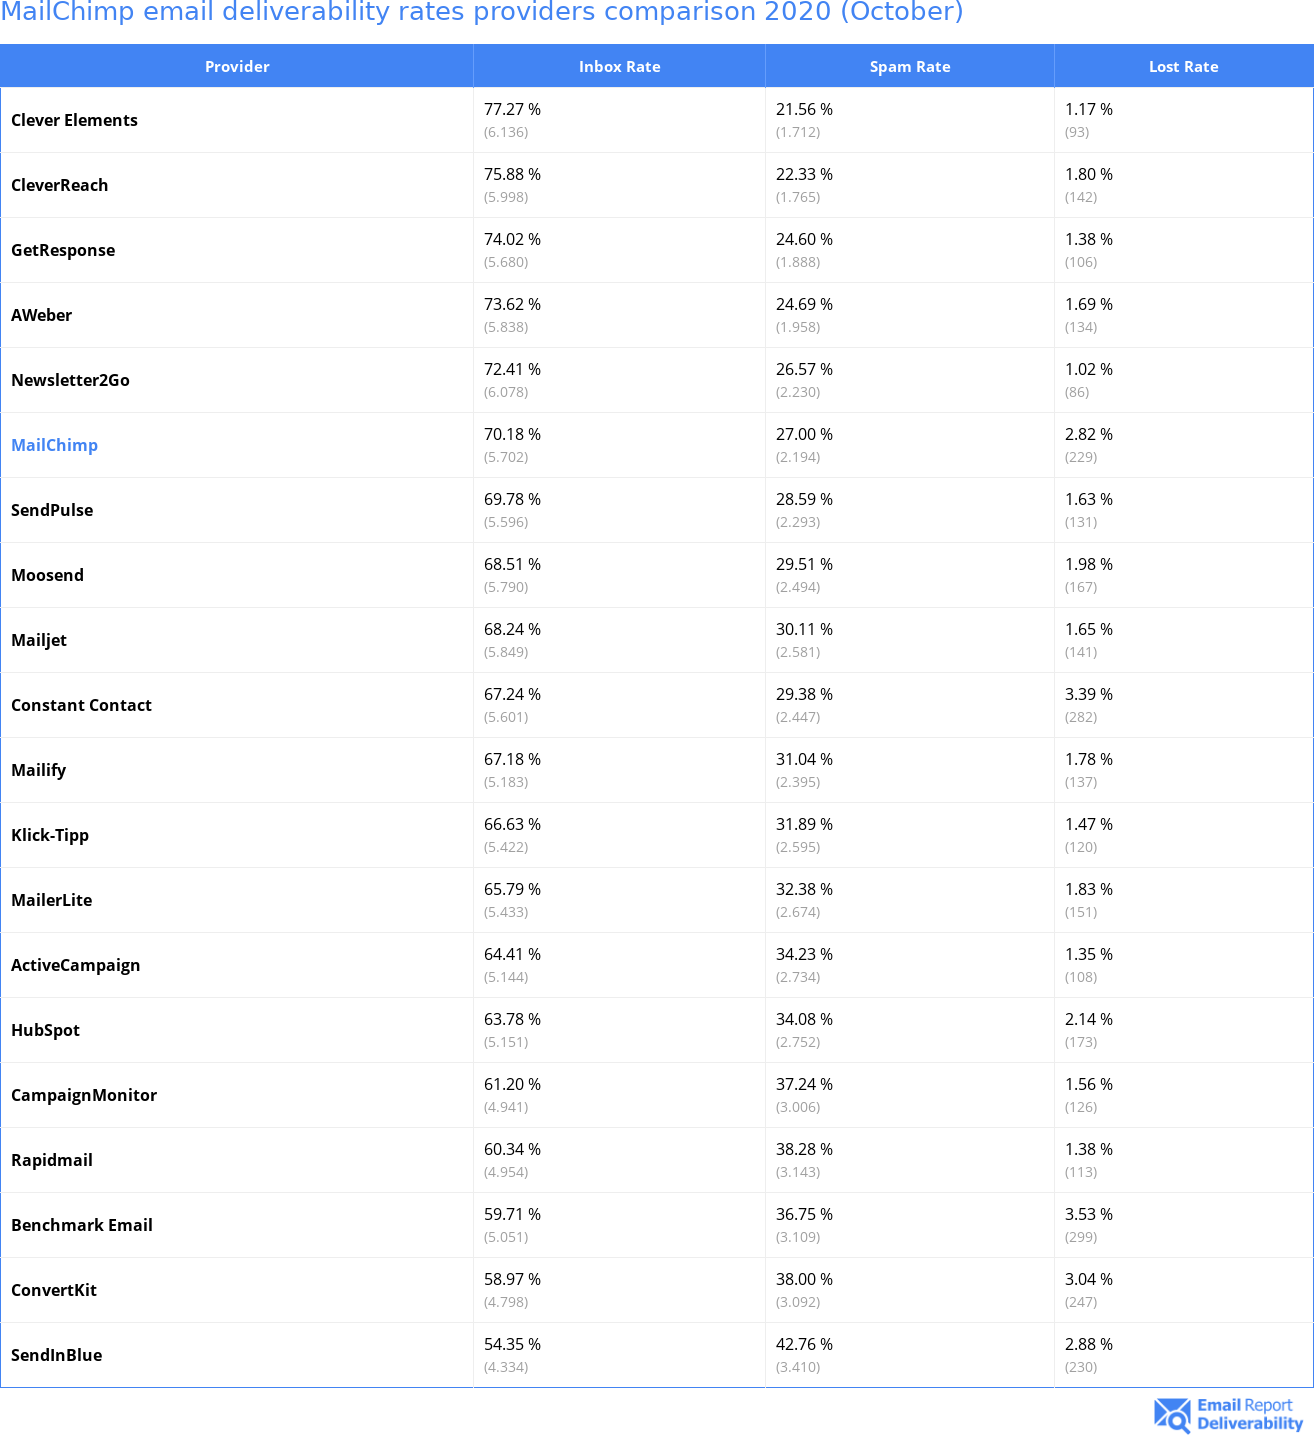 MailChimp email deliverability rates providers comparison 2020 (October)